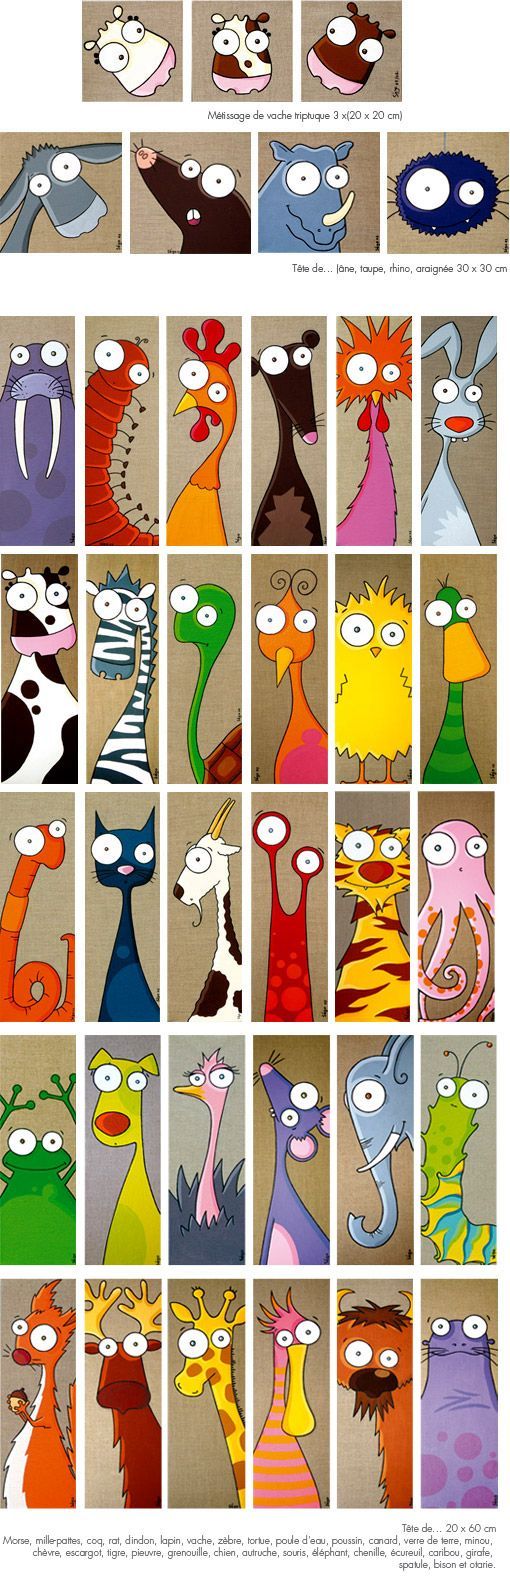 Funny animals, sketch, illustration, drawings, graphic, Kraft paper